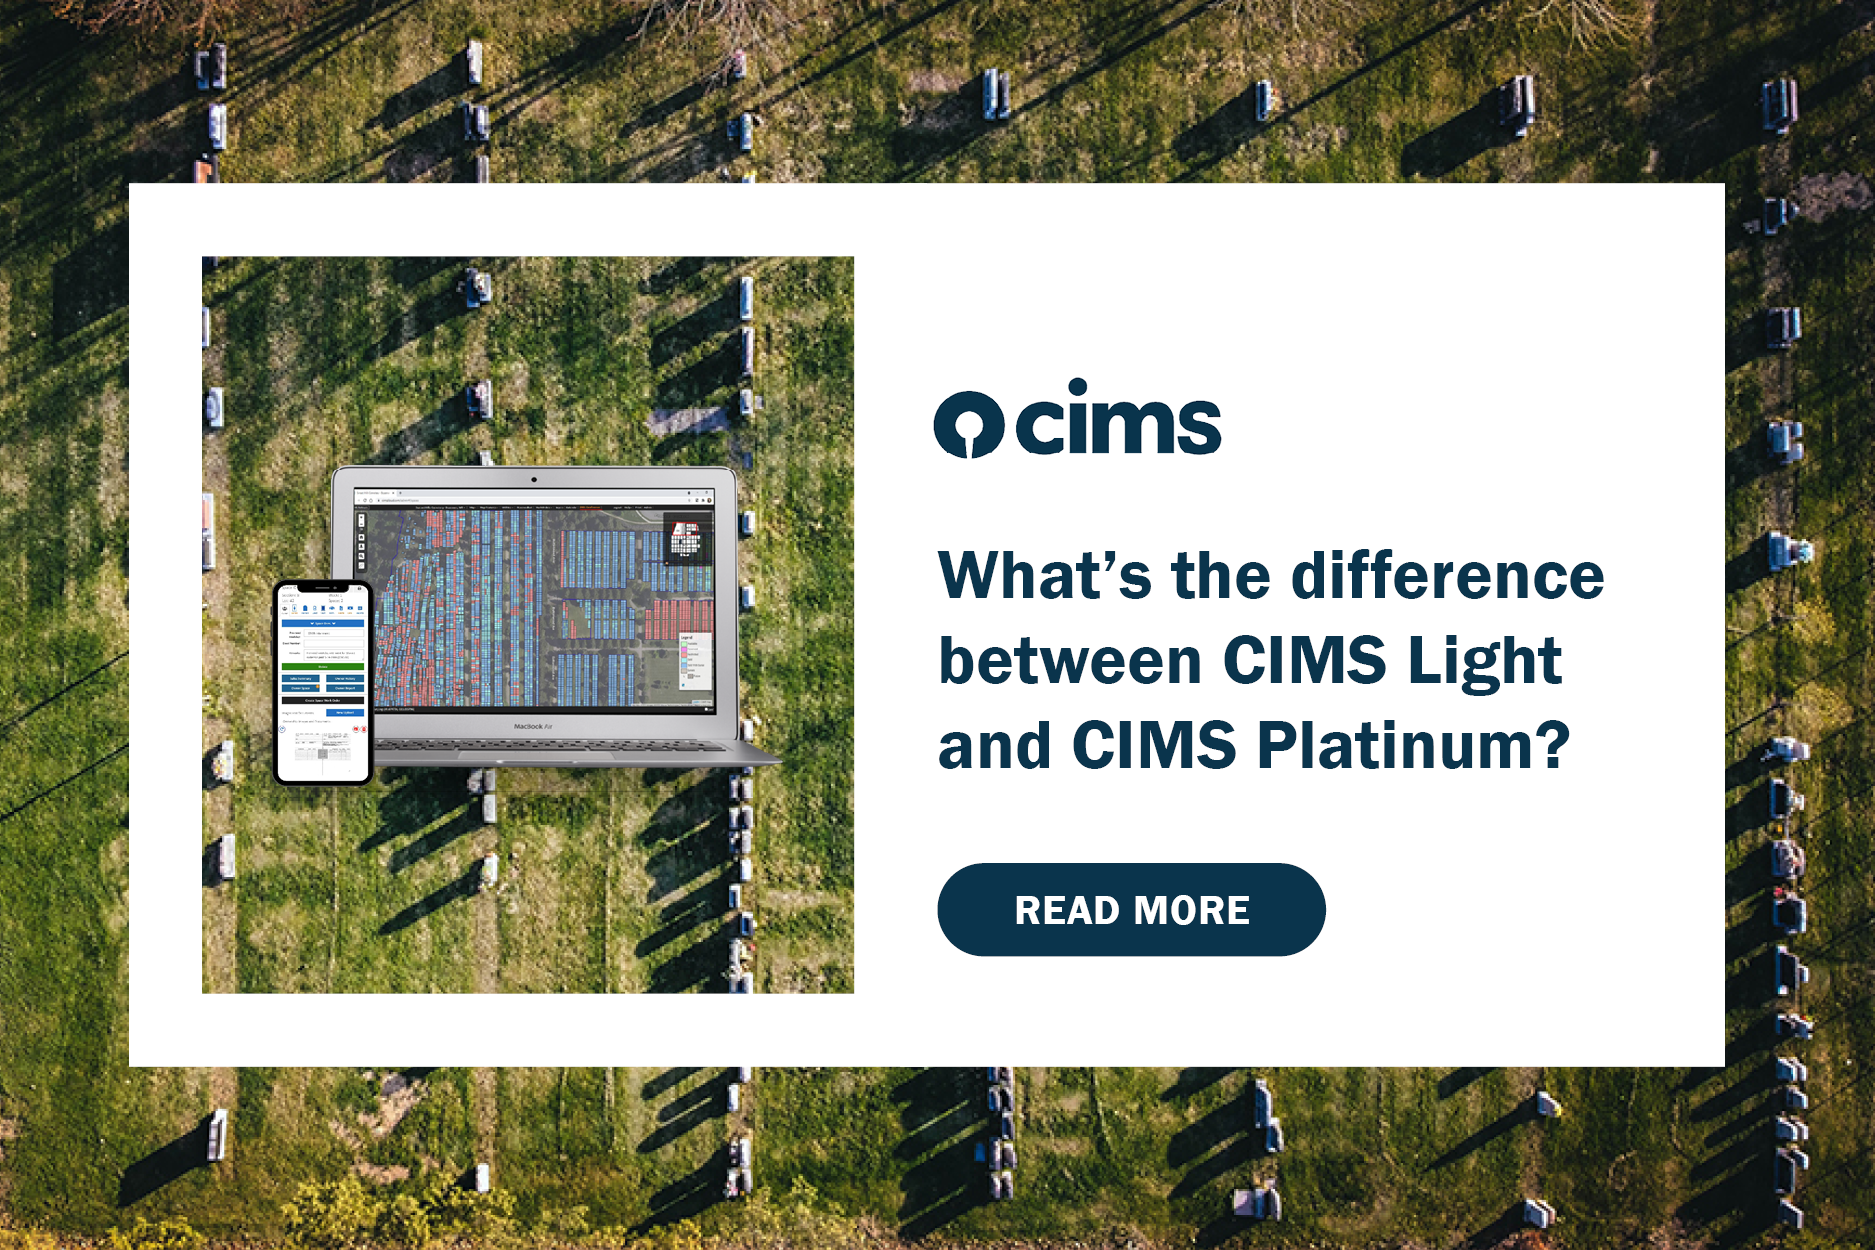 A laptop and phone display the CIMS Light and CIMS Platinum interface, respectively. [Text] What's the difference between CIMS Light and CIMS Platinum? Read more.